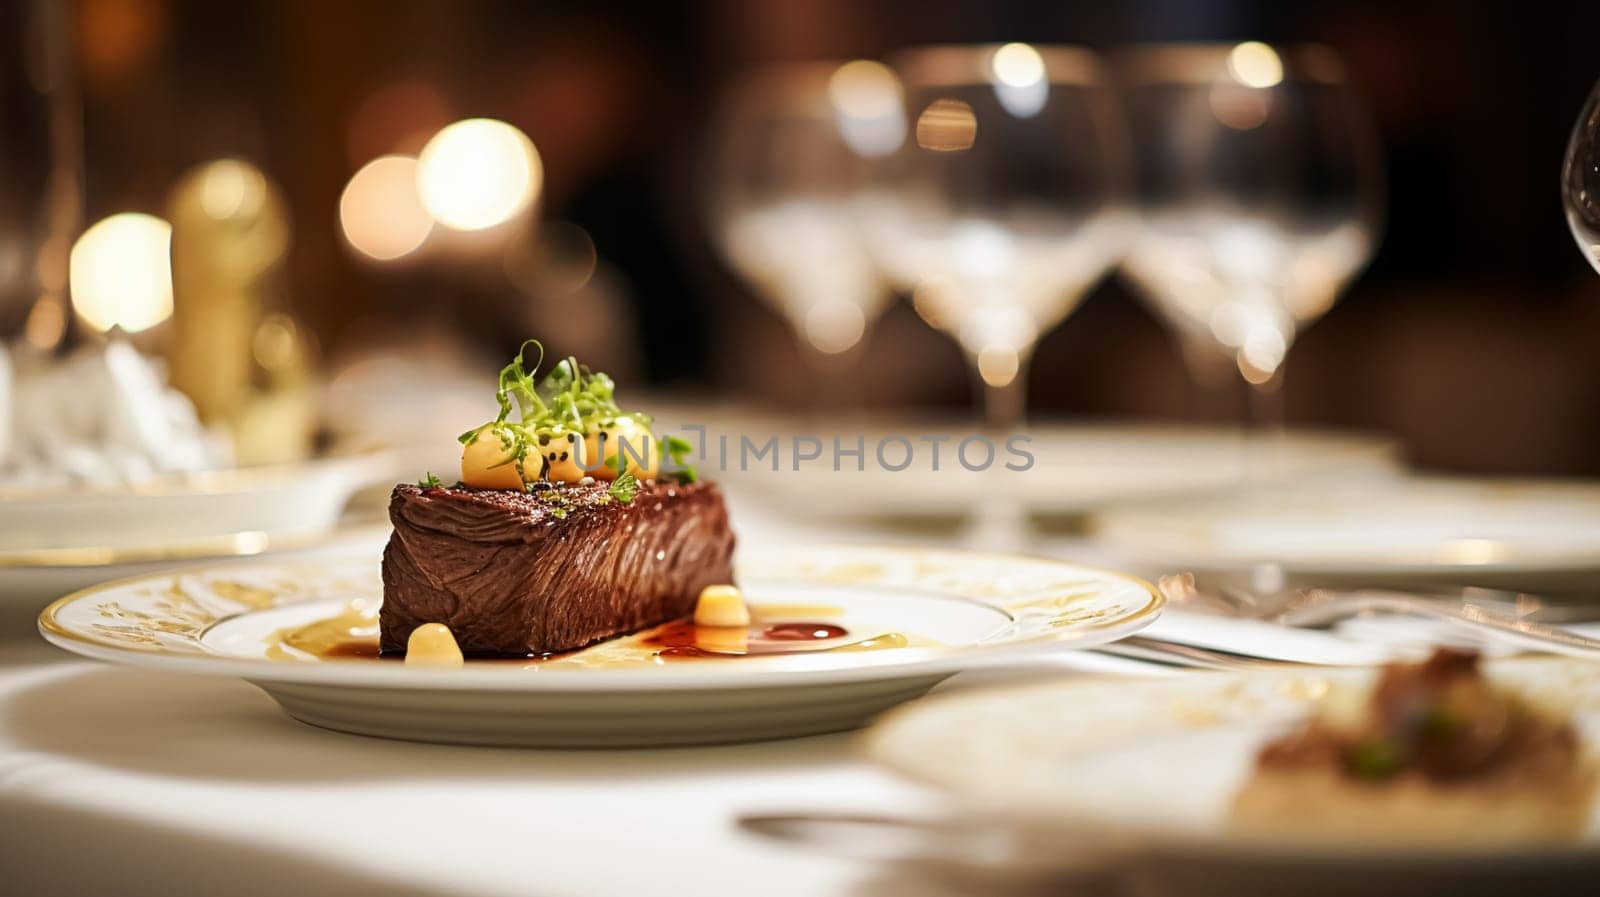 Exquisite main course meal at a luxurious restaurant, wedding food catering and English cuisine